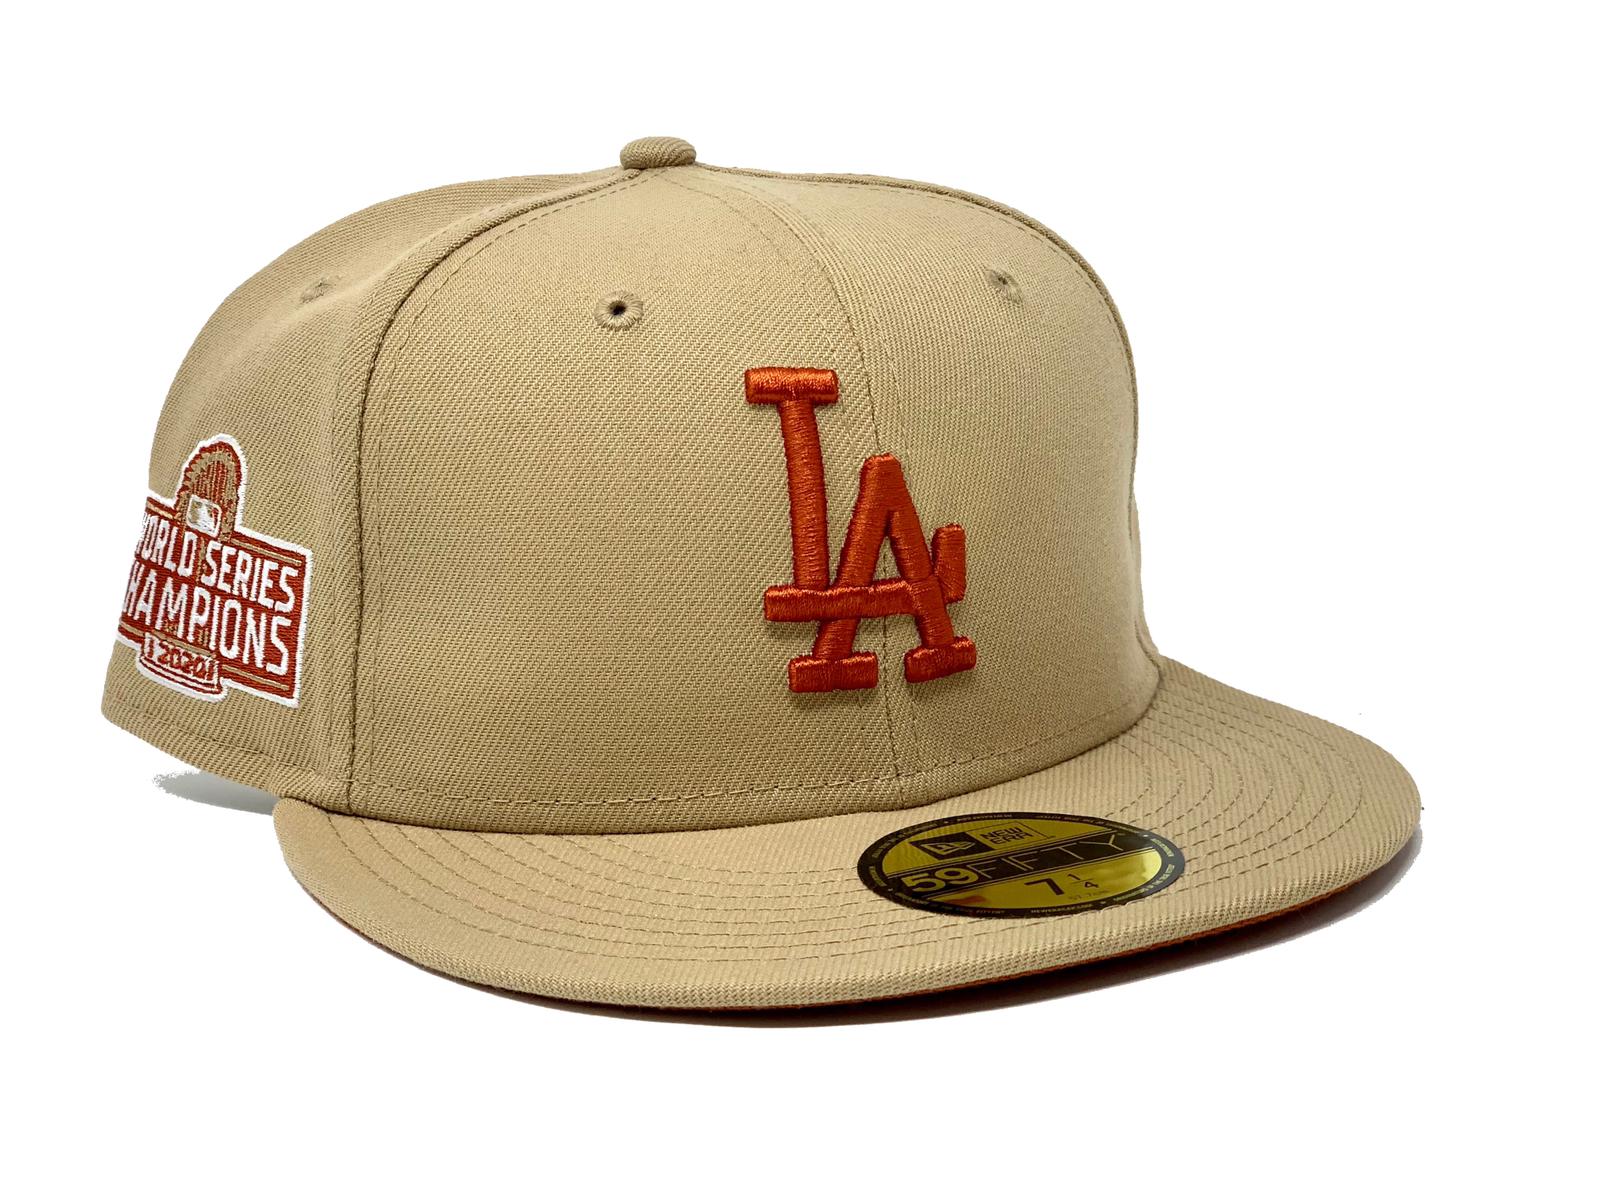 2020 Los Angeles Dodgers World Series Champions Gear List, Buying